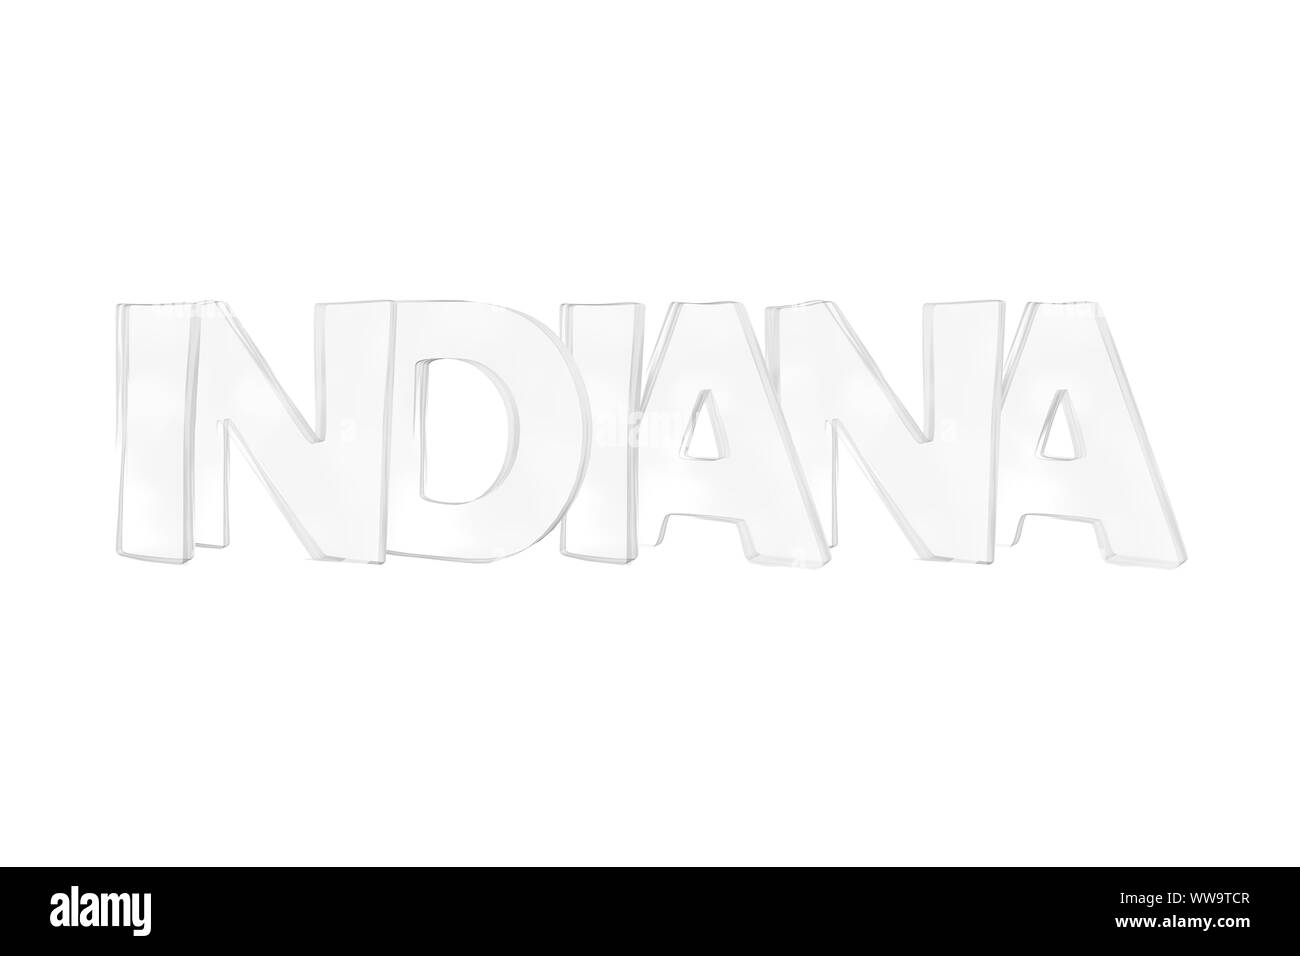 Indiana. Isolated USA state names with white background Stock Photo